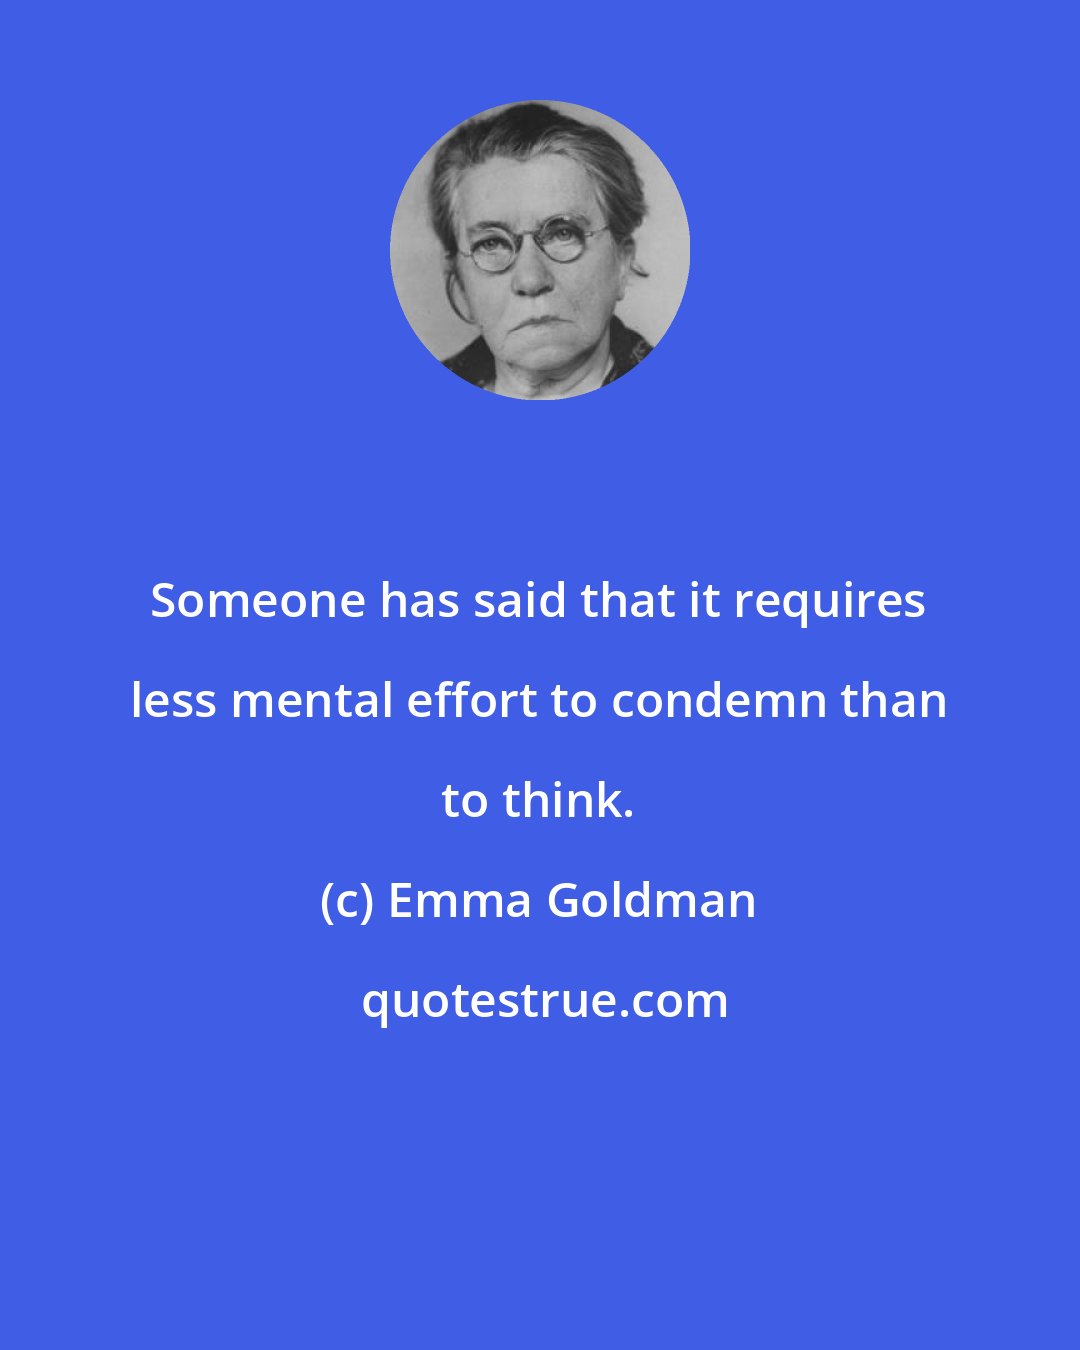 Emma Goldman: Someone has said that it requires less mental effort to condemn than to think.